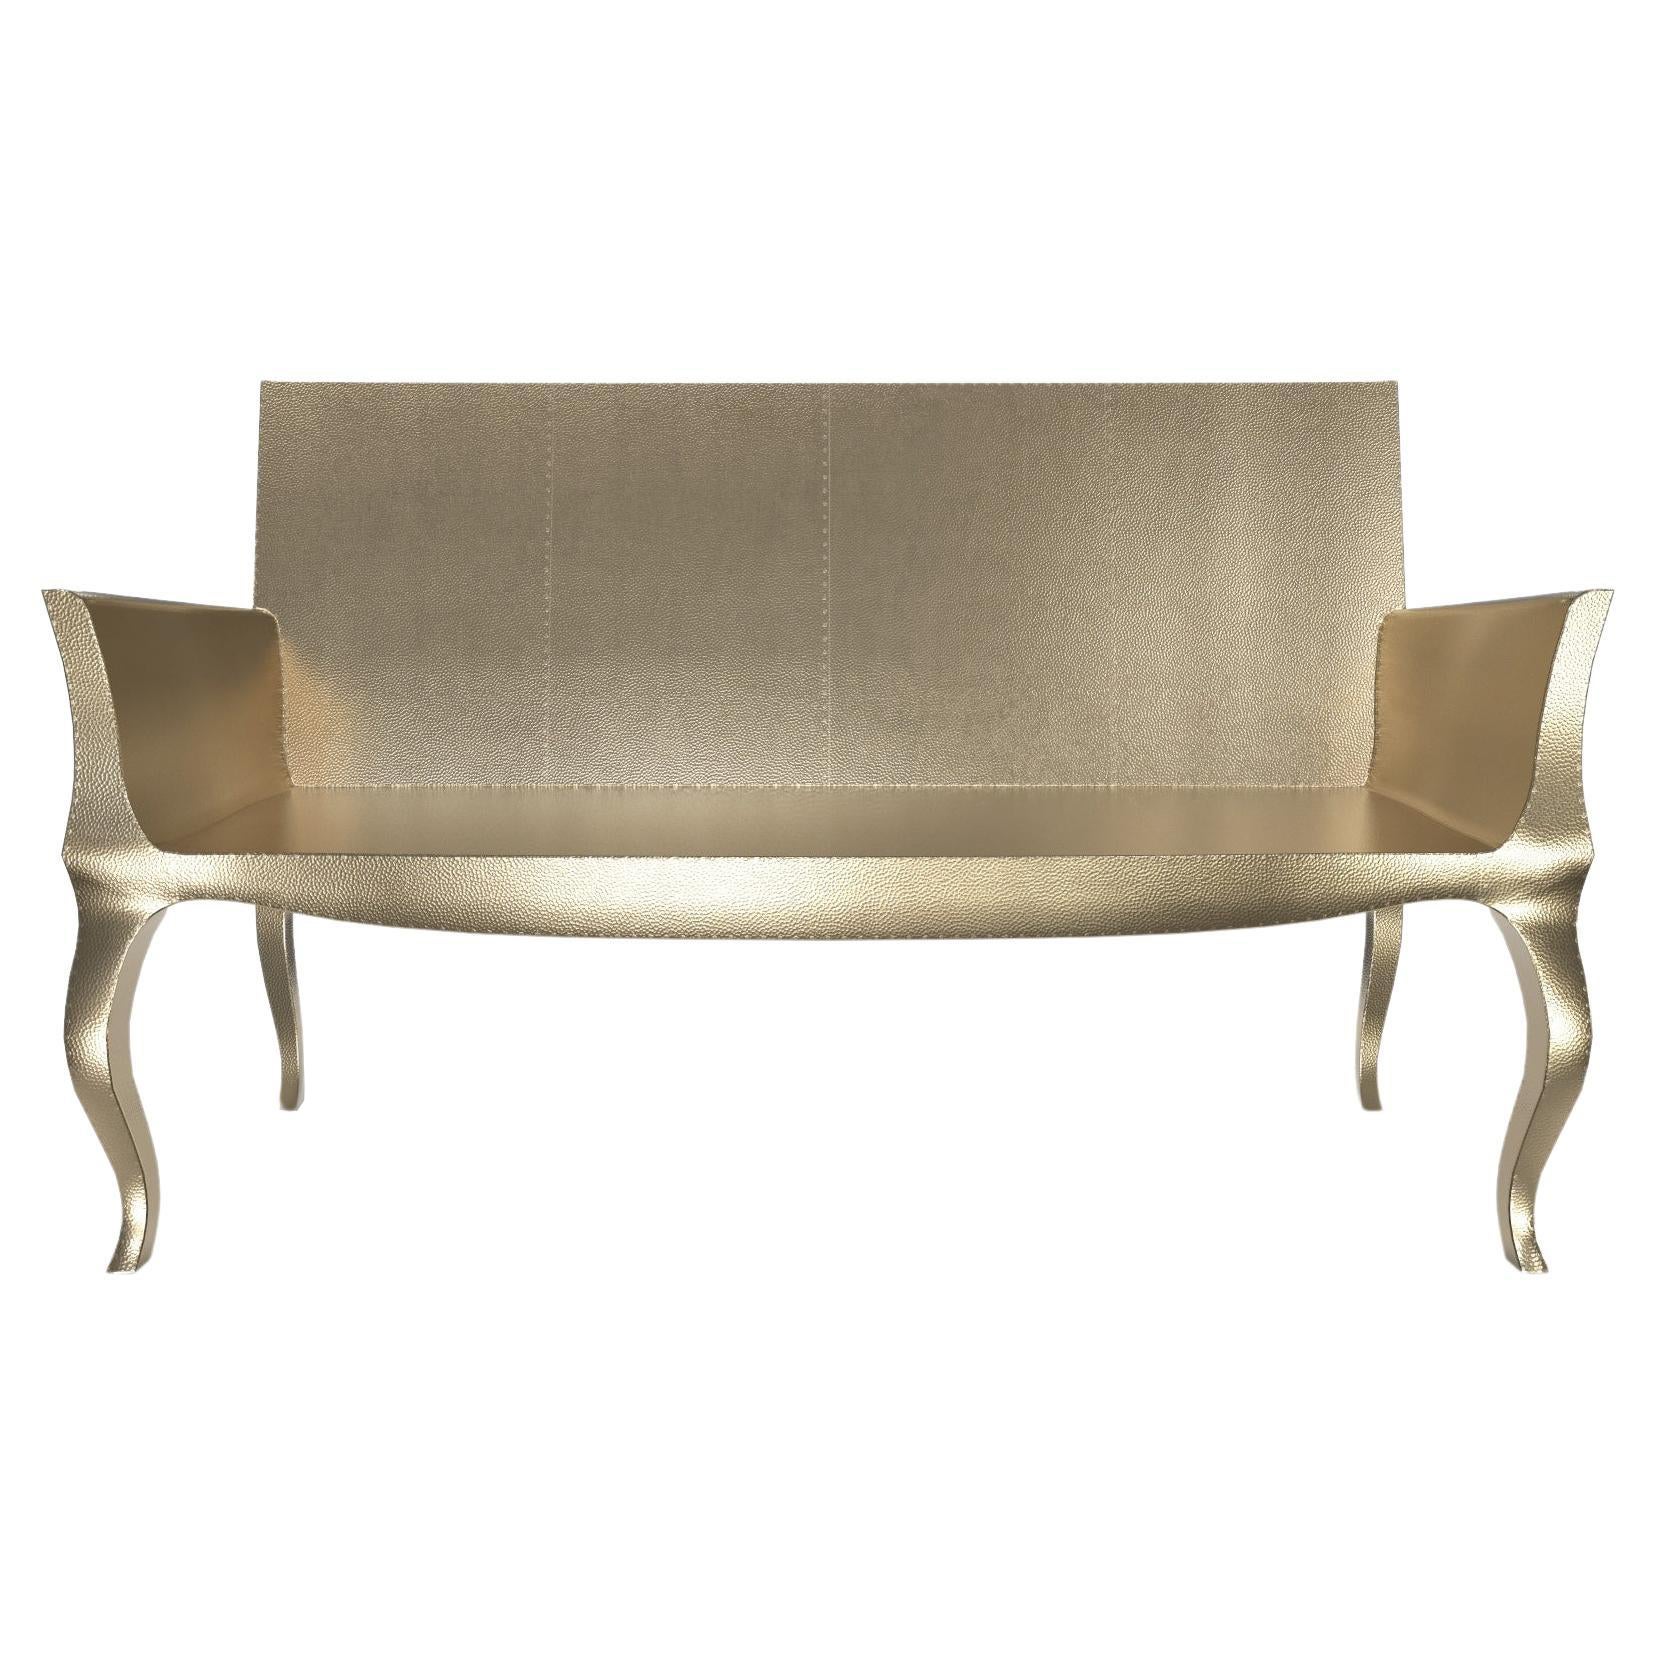 Louise Settee Art Deco Chaise Longues in Mid. Hammered Brass by Paul Mathieu